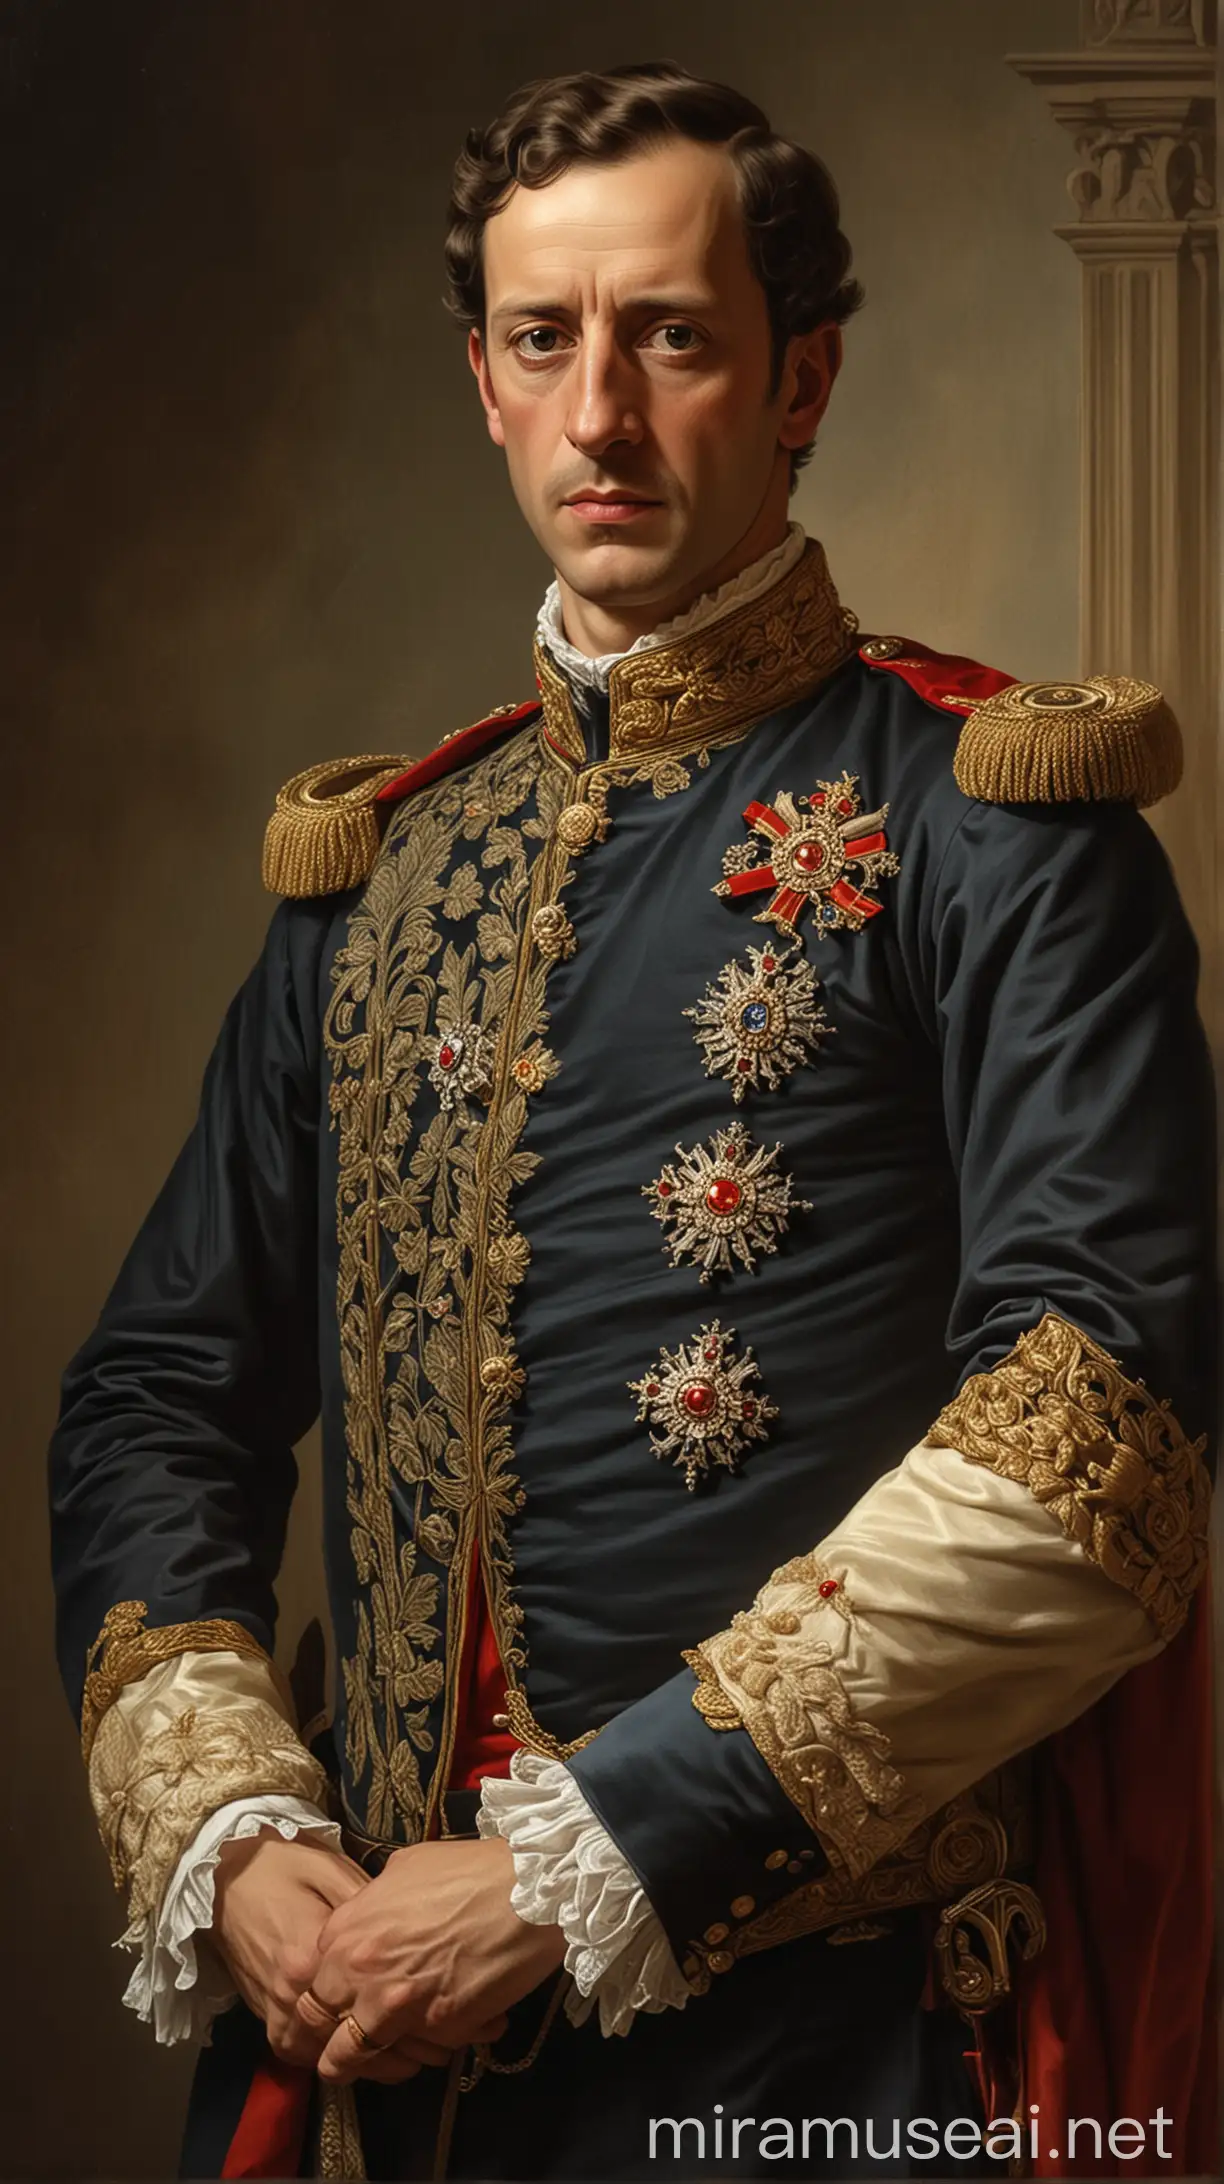 Illustrate a historical portrait of Ferdinand VII of Spain with subtle hints to the rumors about his endowment, maintaining a balance between historical accuracy and the legend.